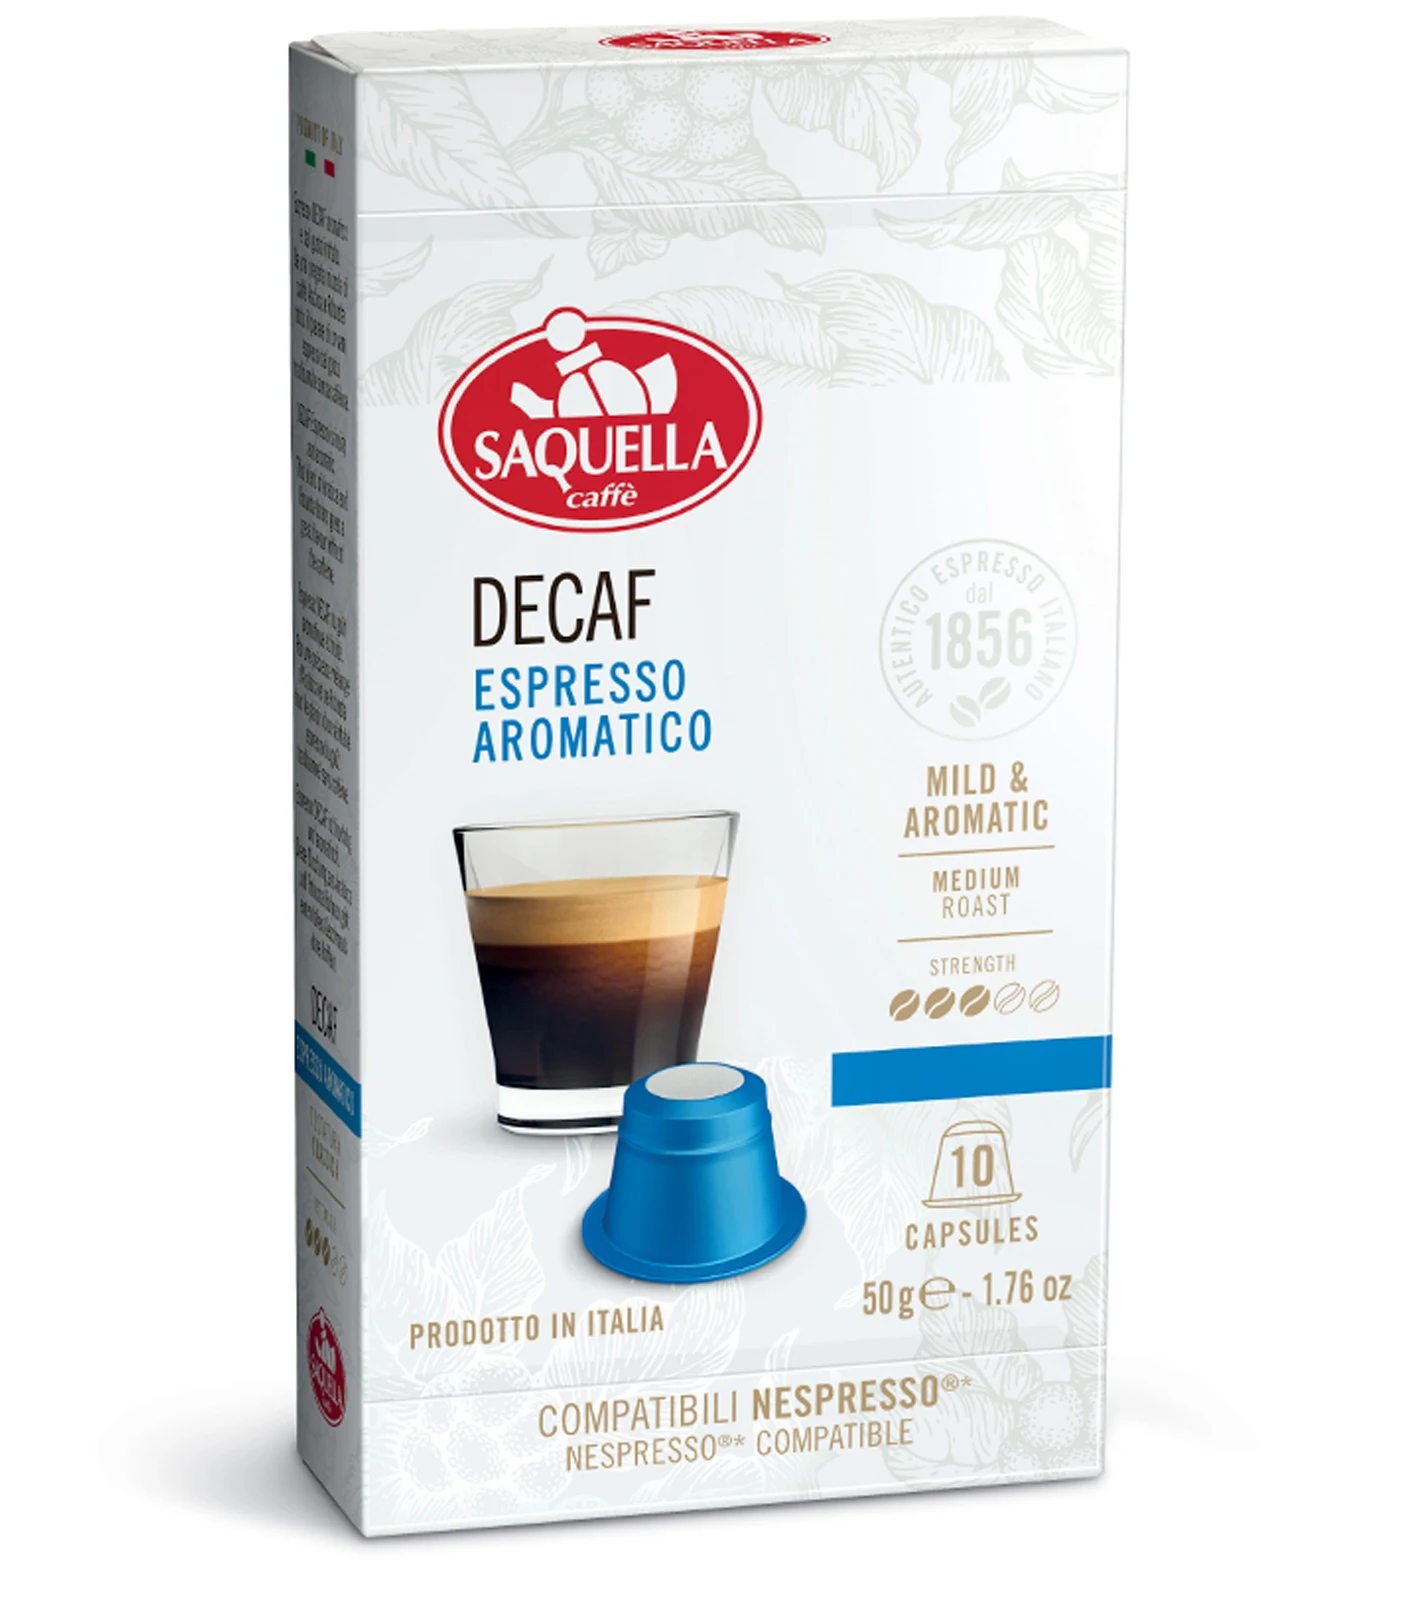 Made in Italy 100 Capsules Nespresso Compatible Decaf Espresso Coffee for everyday